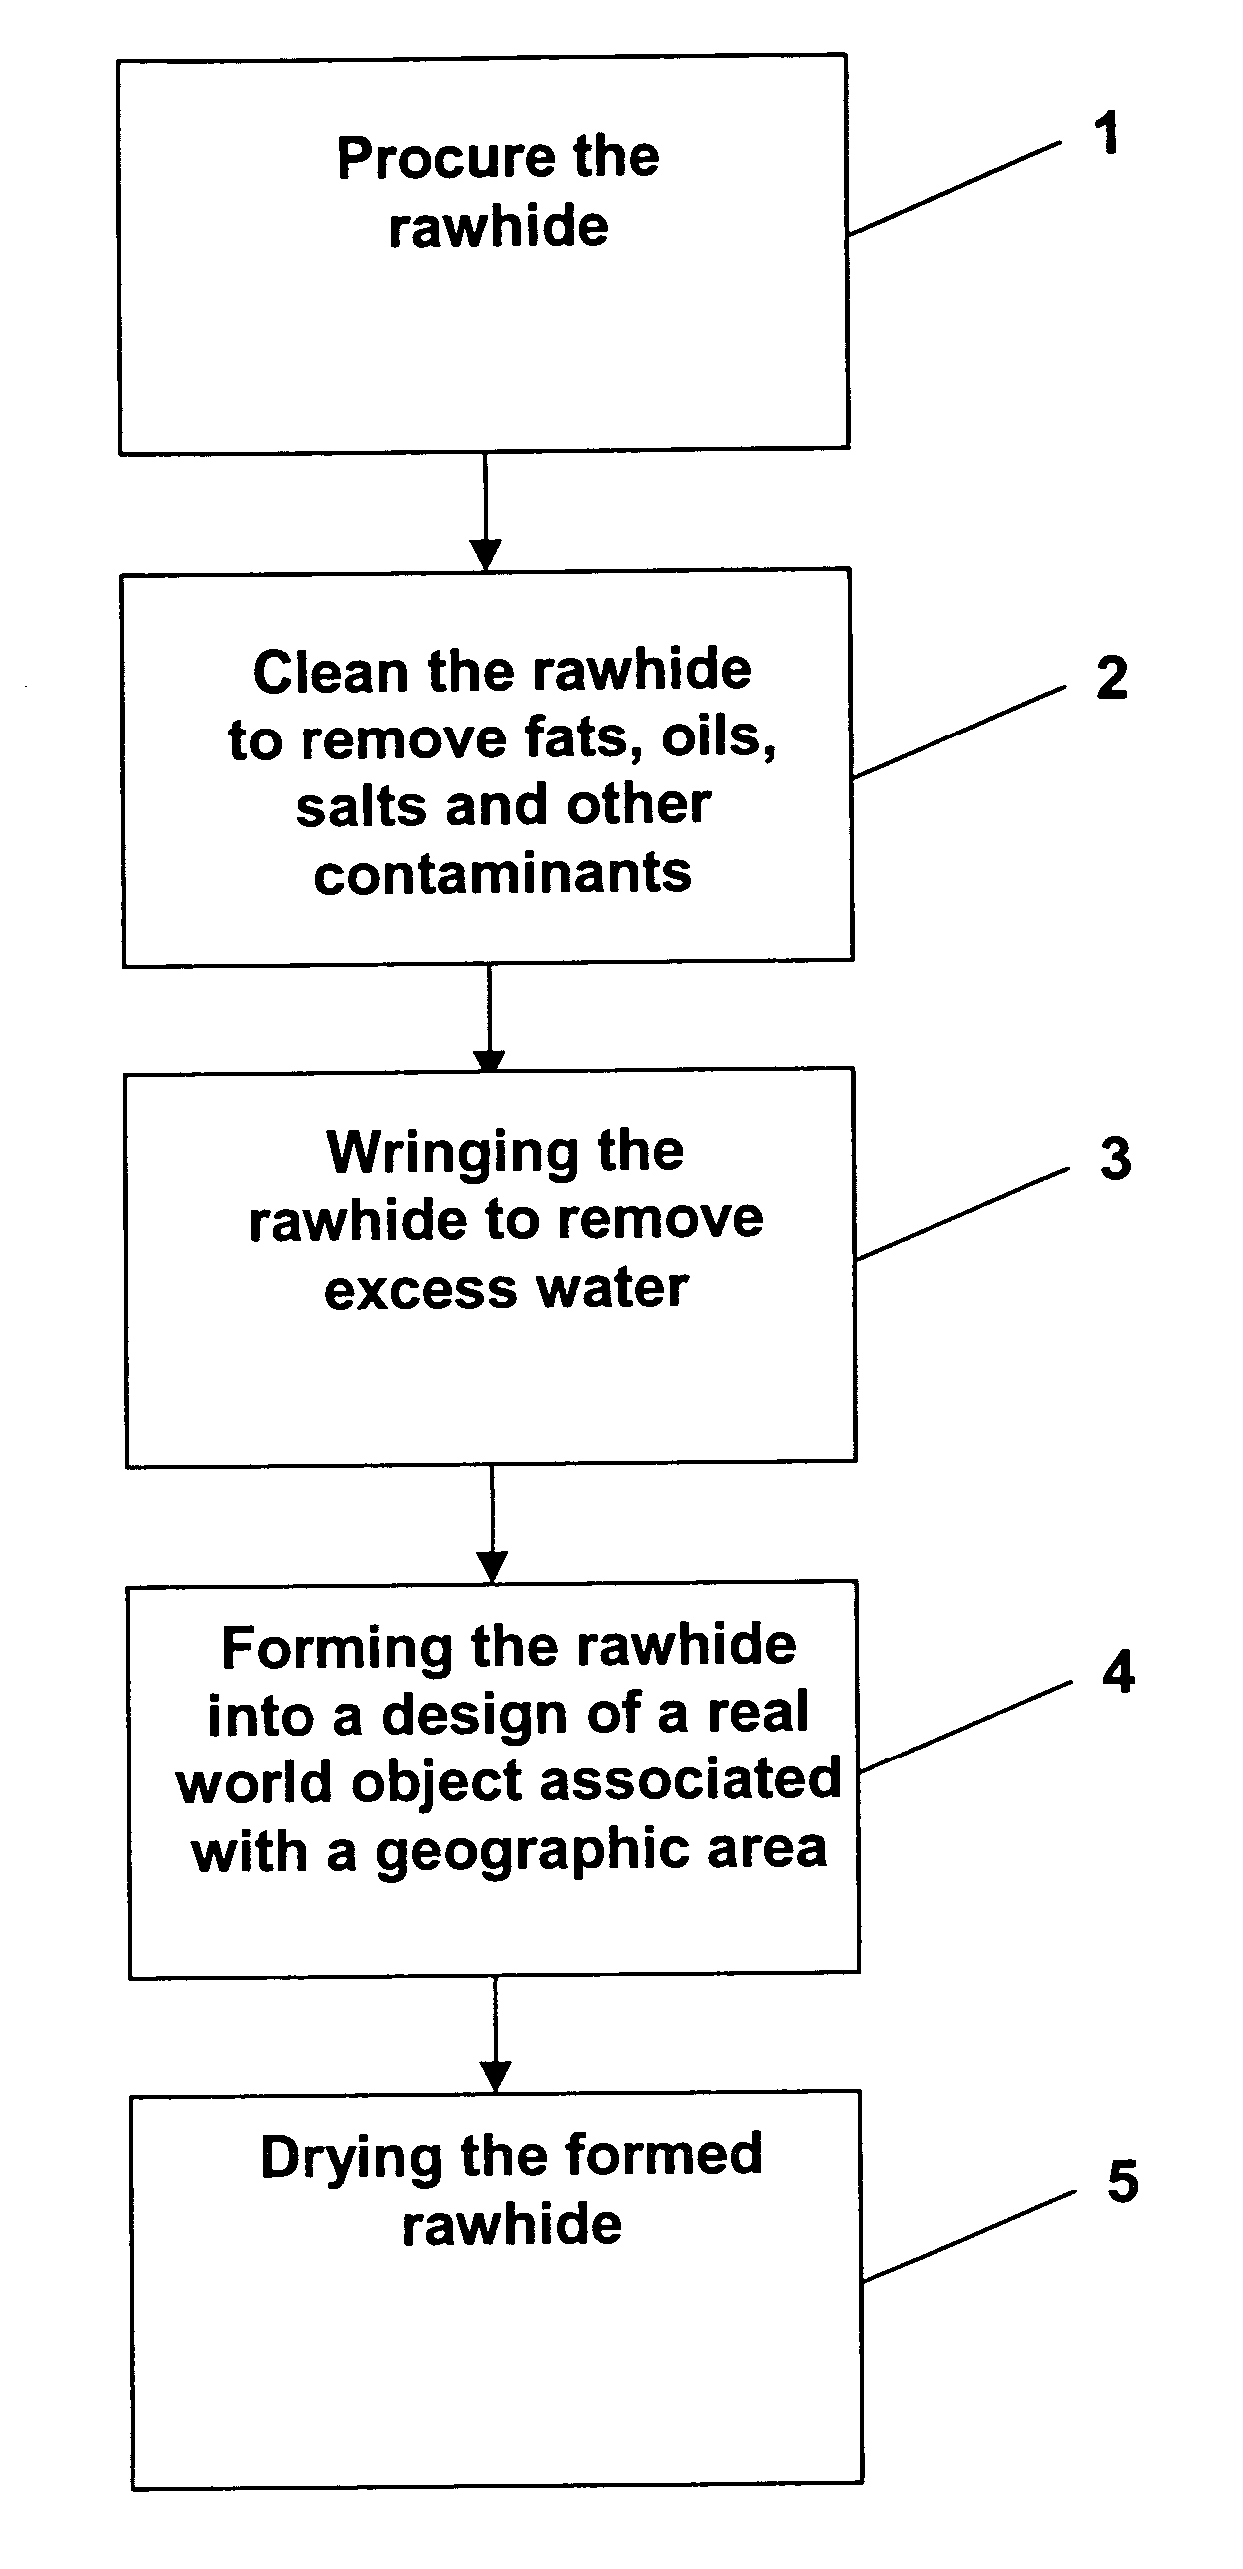 Method and process for manufacturing a shaped pet chewable product